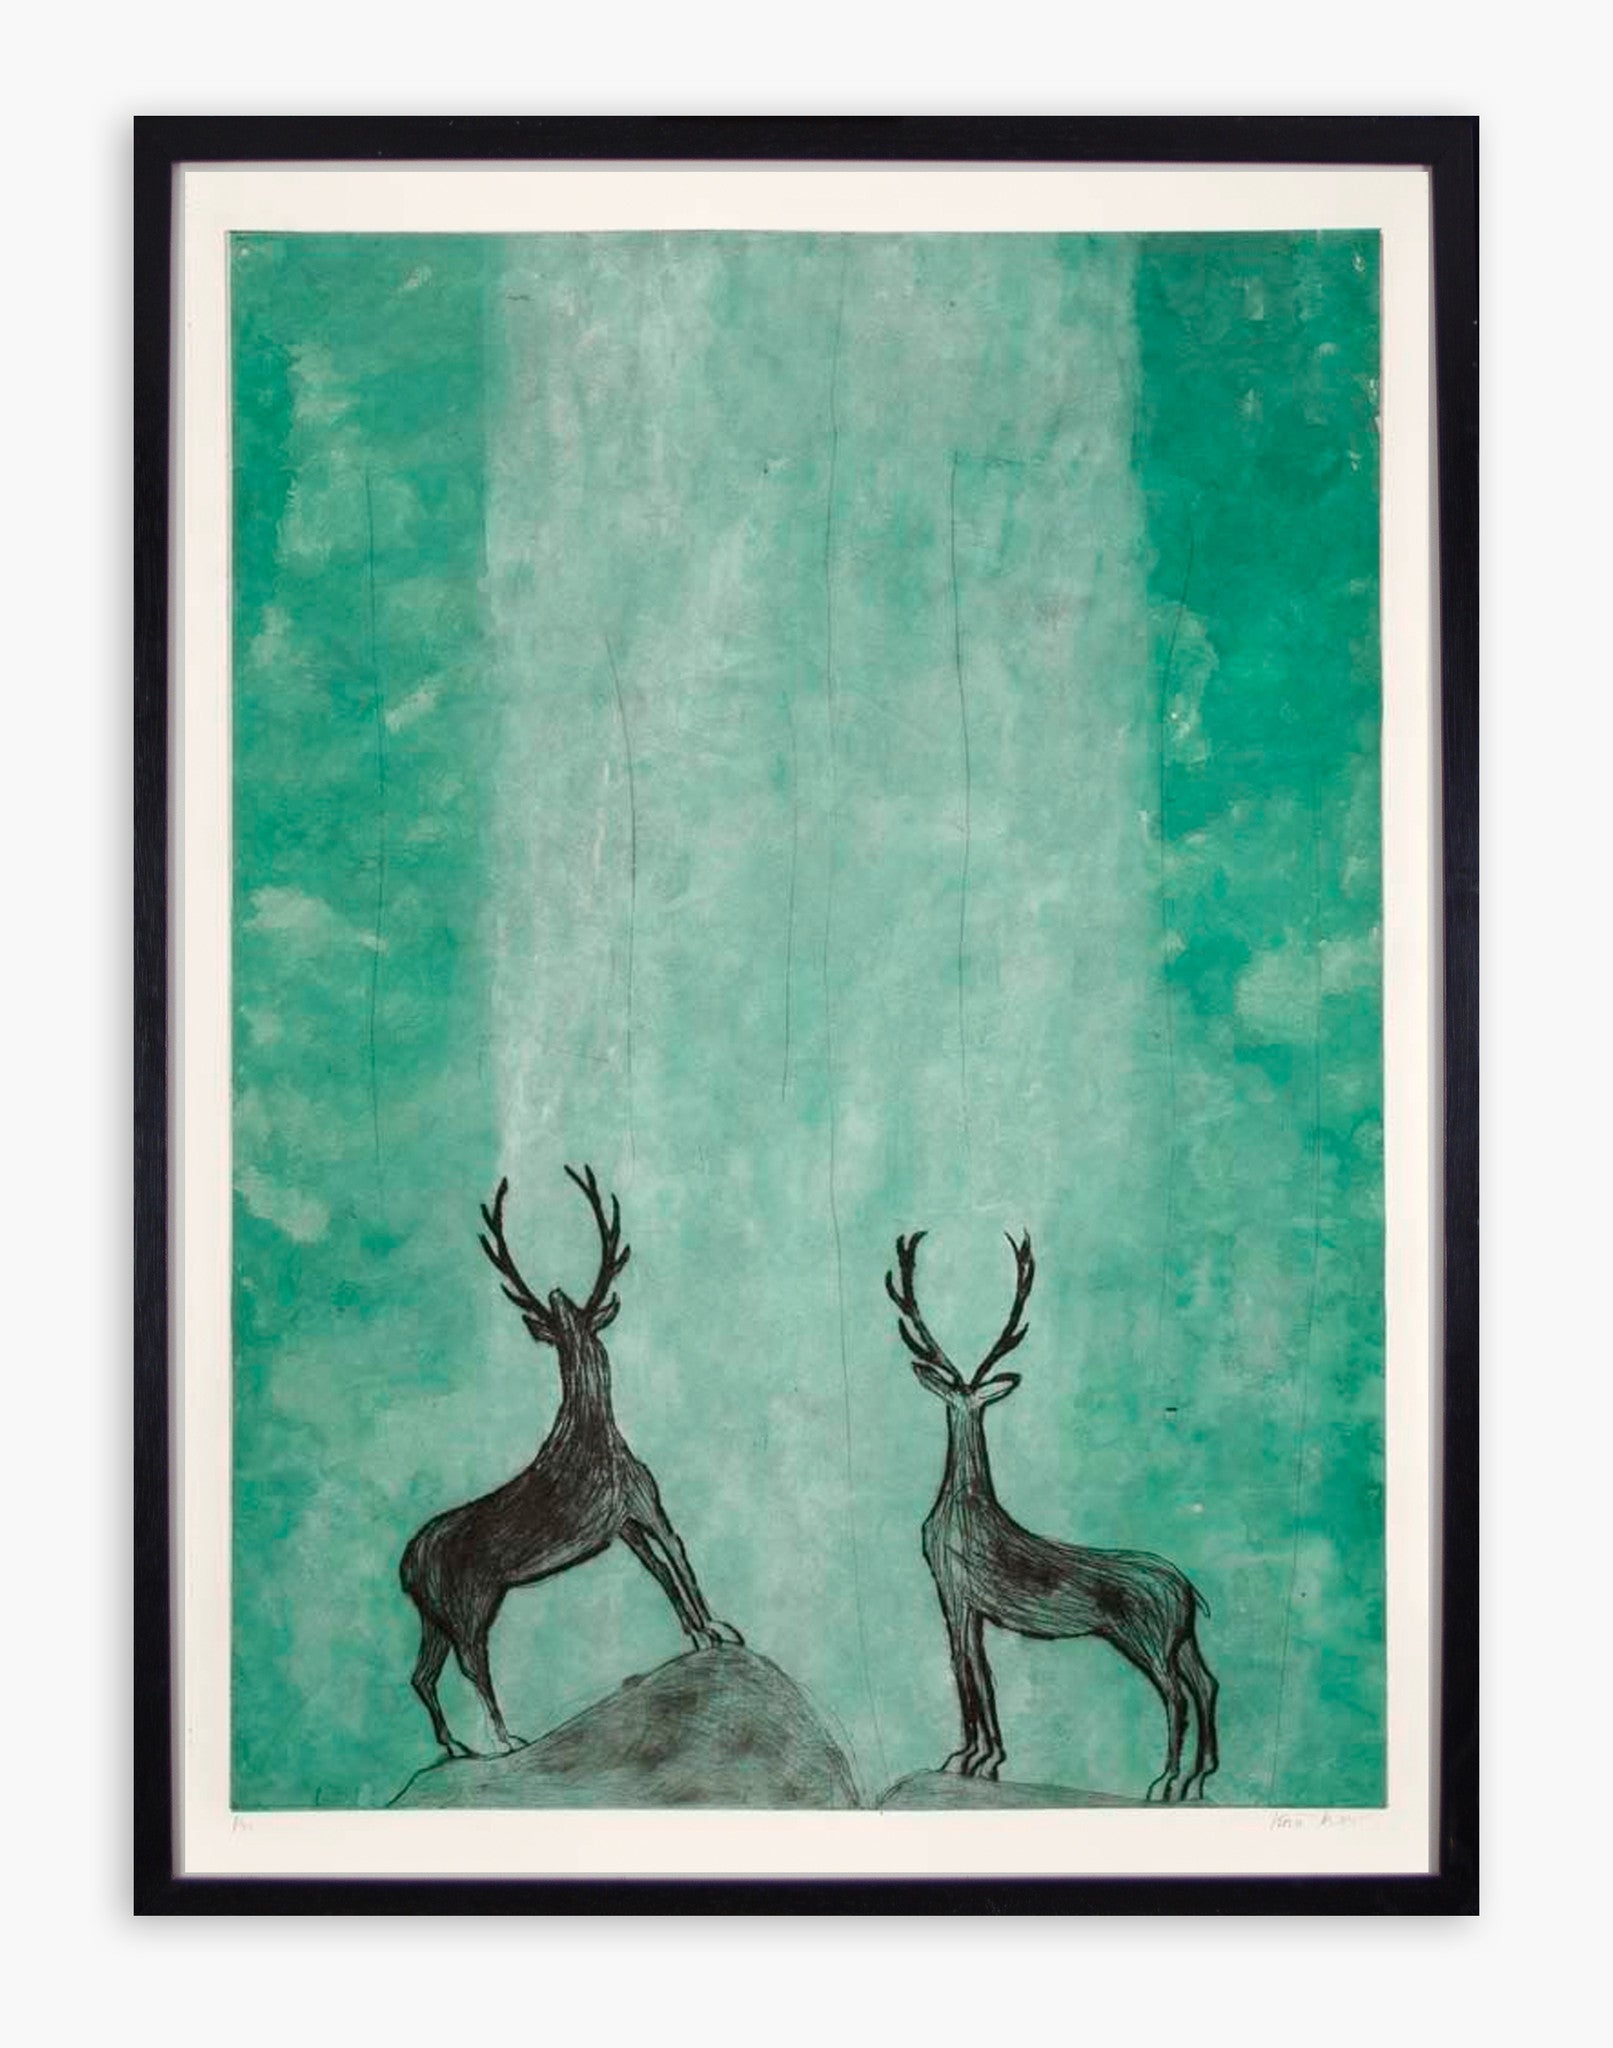 Kate Boxer - OOOOH (Stags admiring a Waterfall) (Framed)